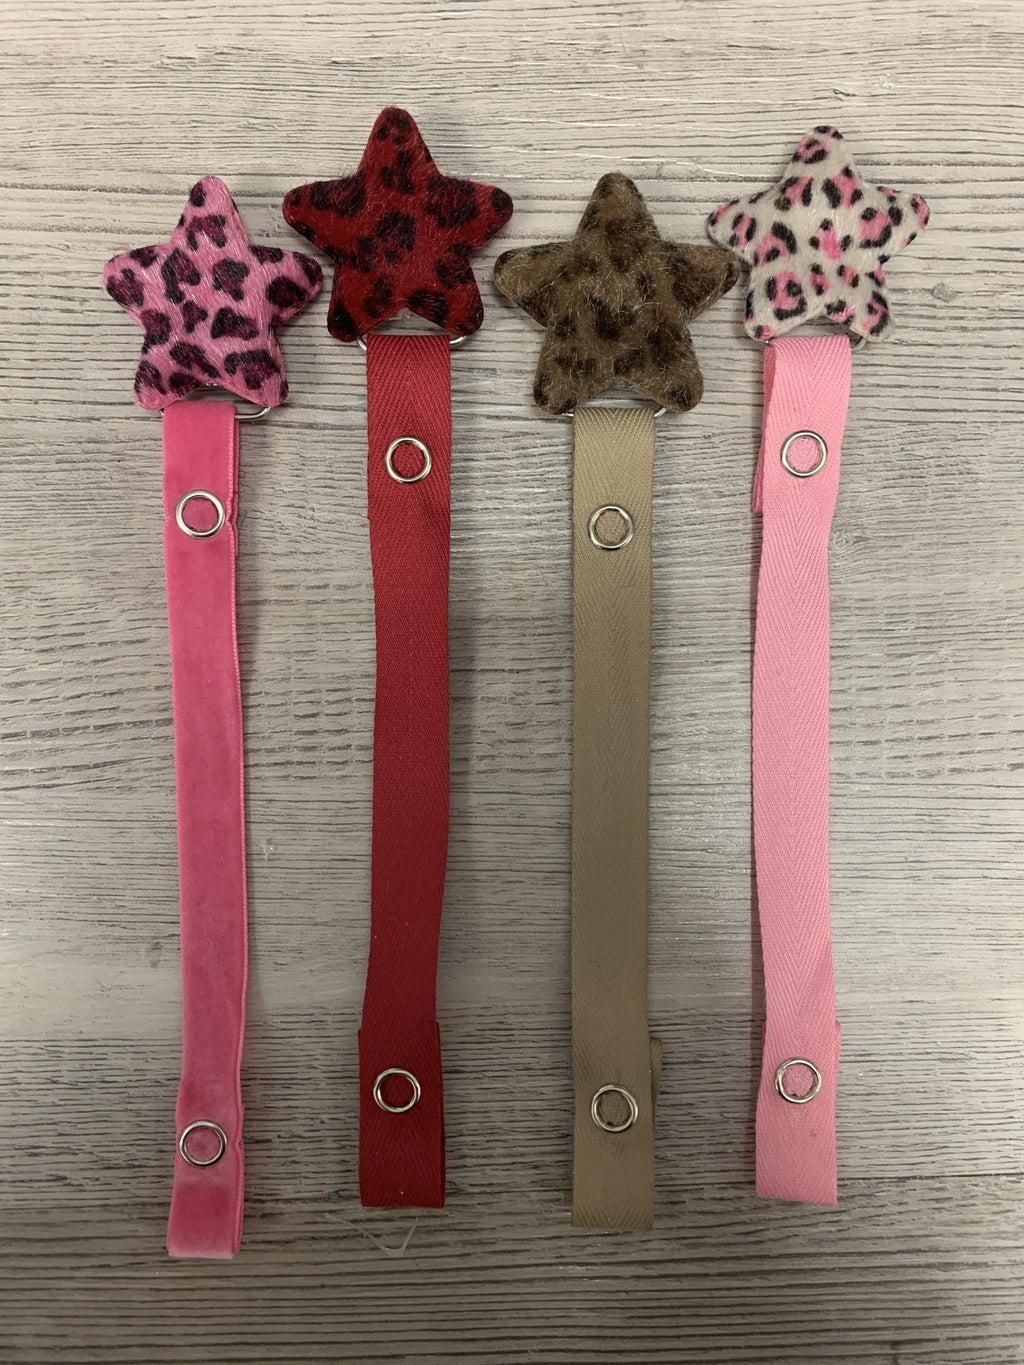 Leopard star hot pink/tan/brown/maroon/red girls and boys